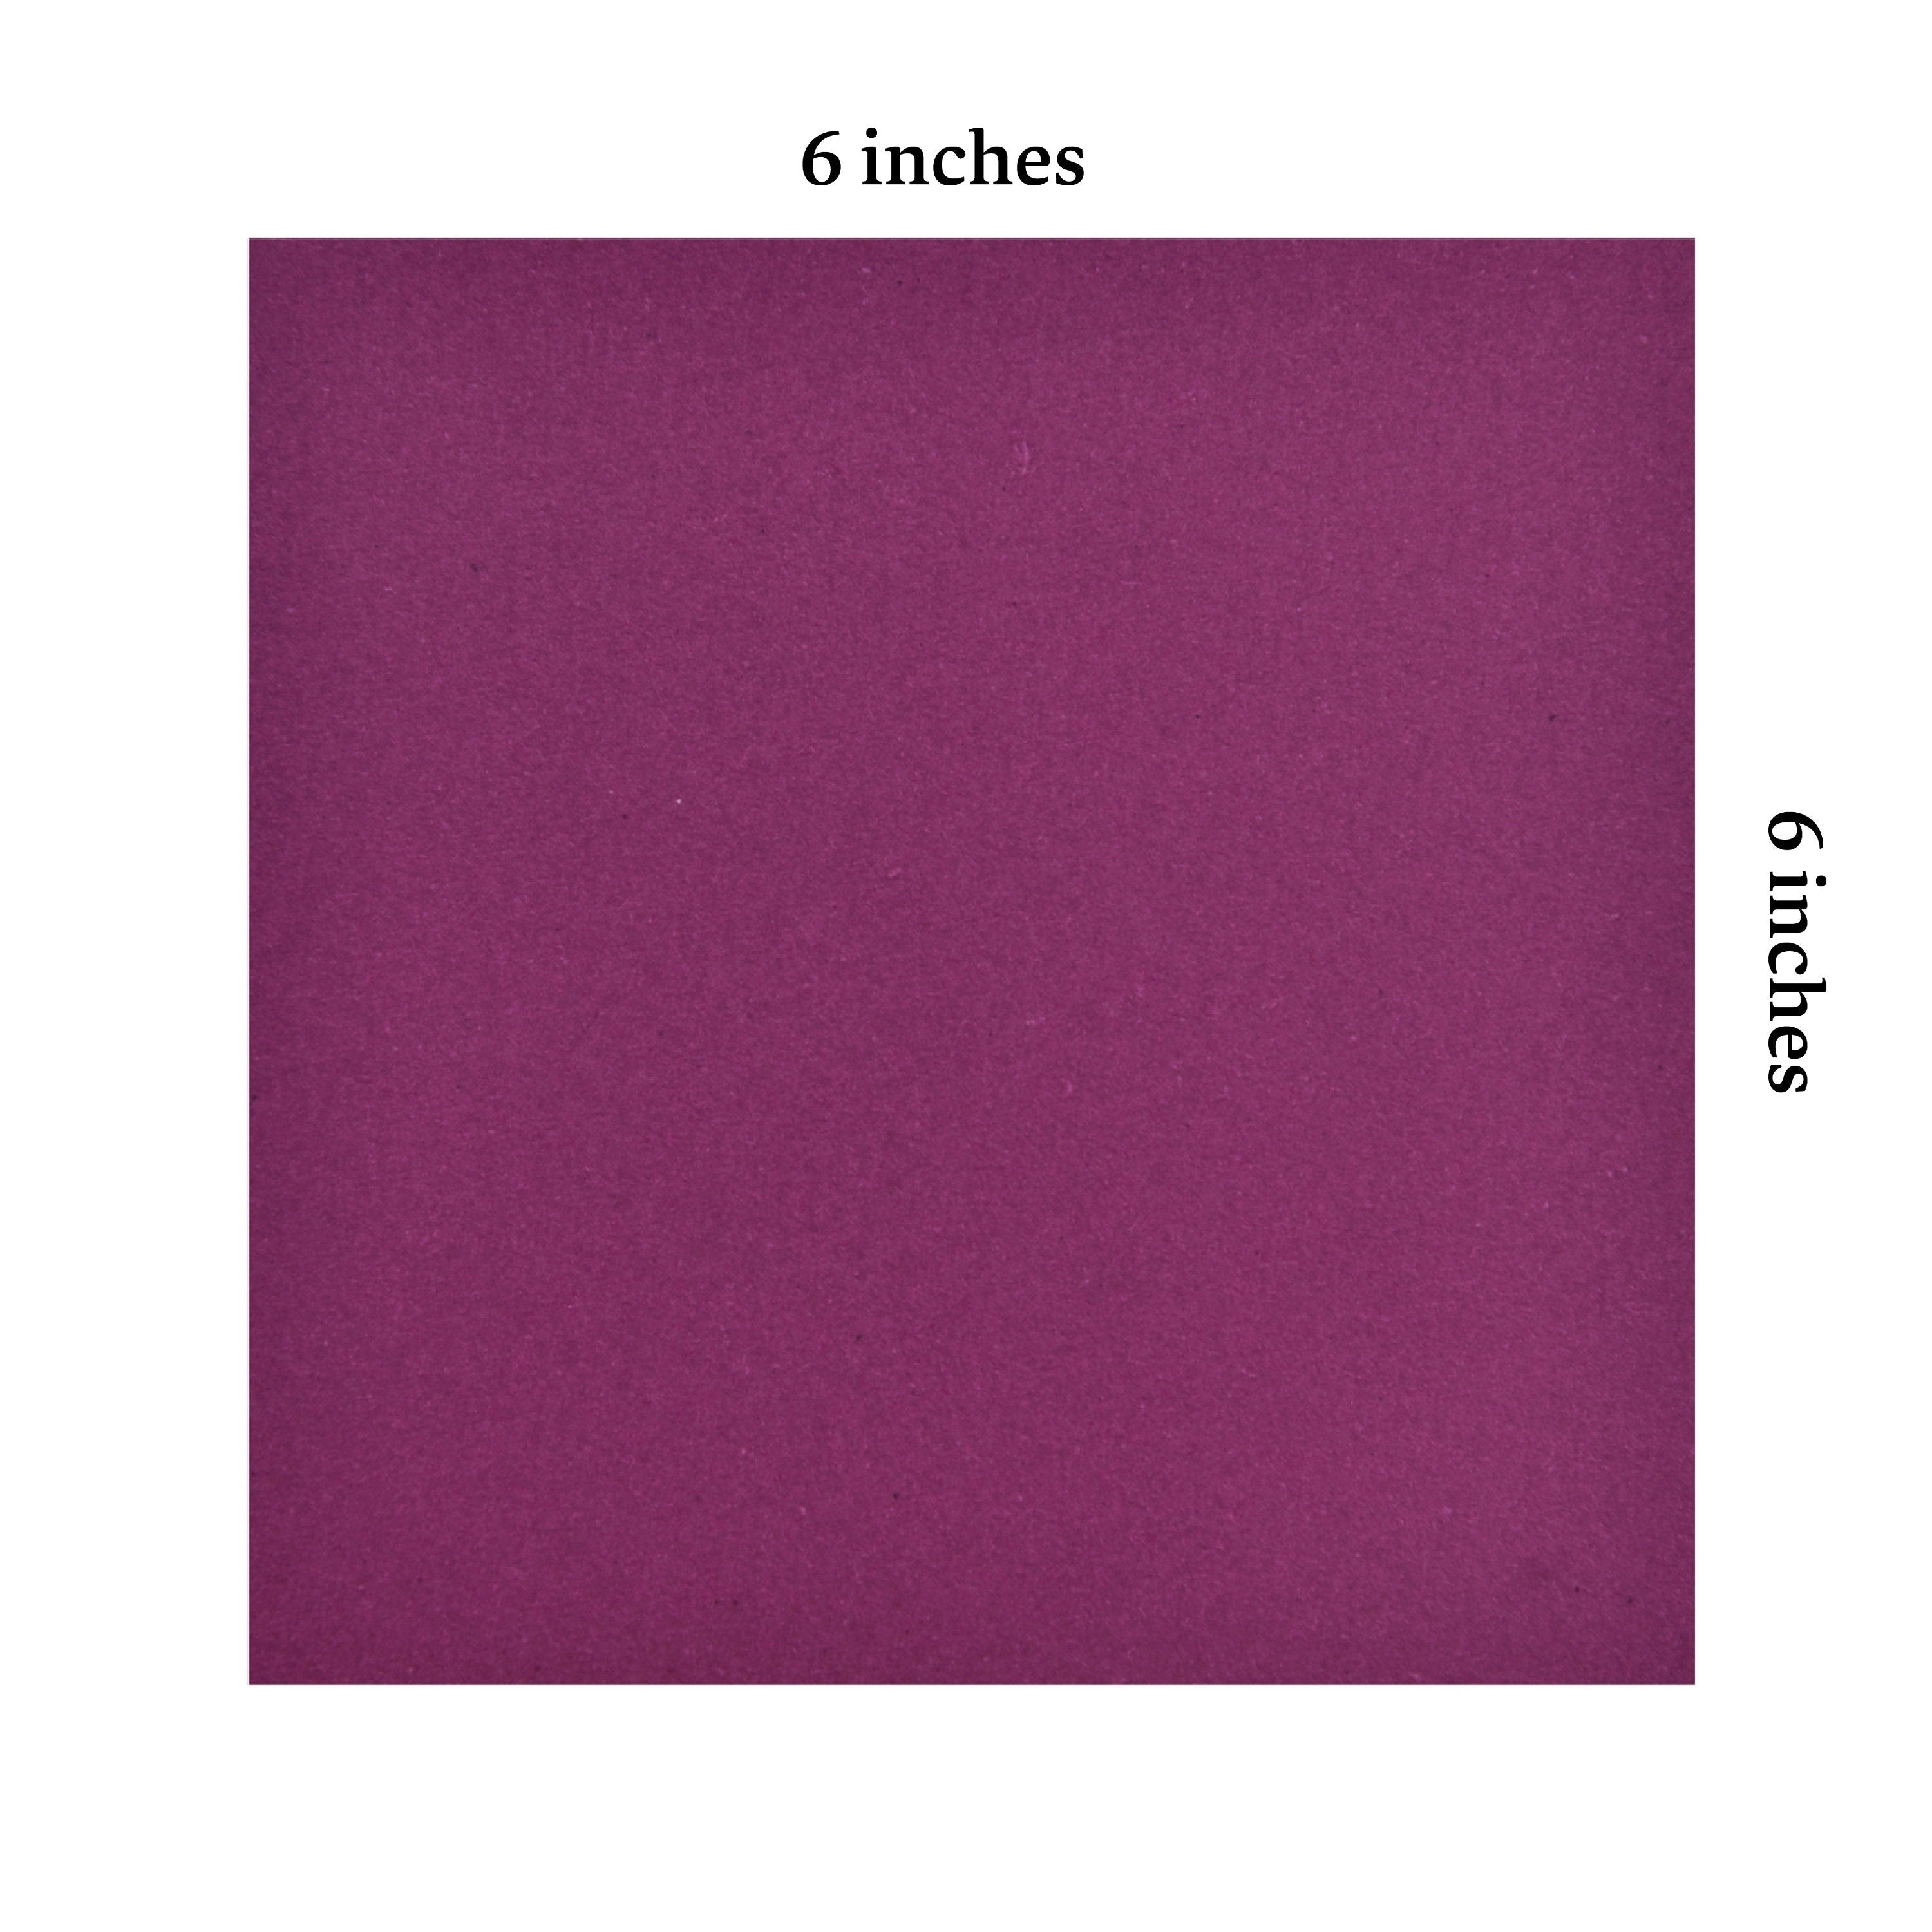 100 Burgundy Origami Paper Sheets 6x6 inches Square Paper Pack for Folding, Origami Cranes, and Decoration - S09